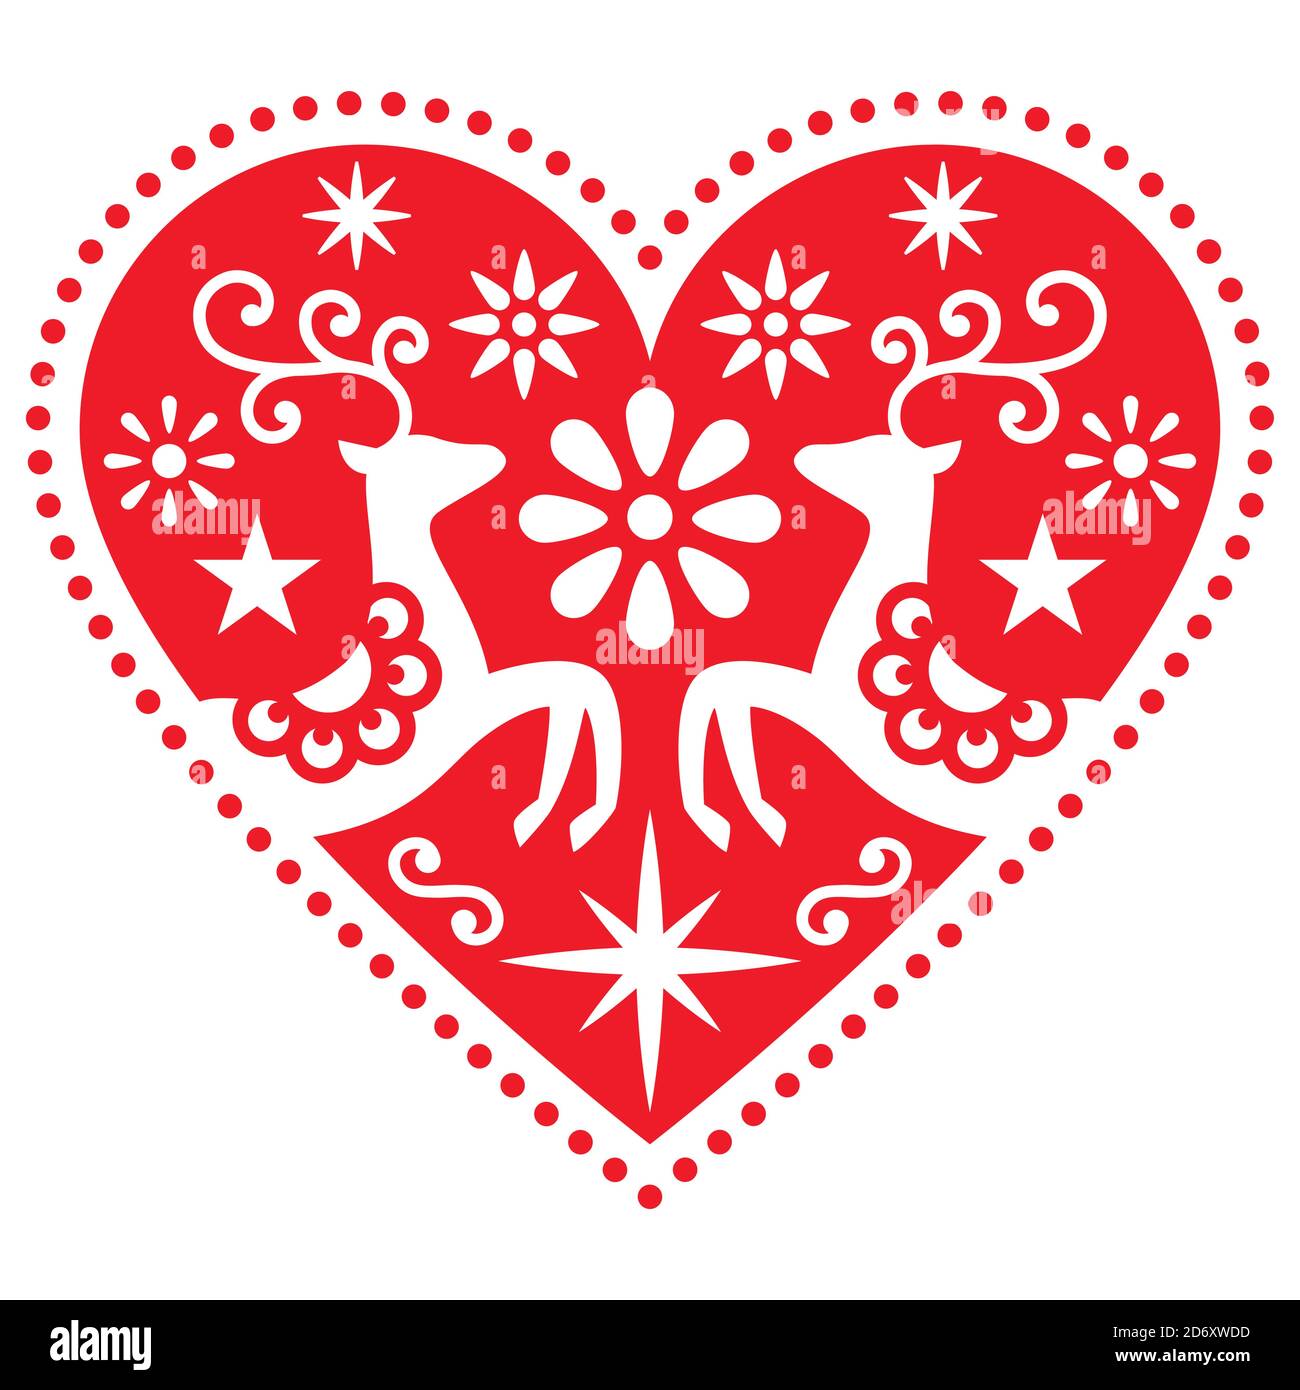 Christmas folk art heart with deer vector greeting card design, Scandinavian retro style merry pattern with flowers and stars Stock Vector